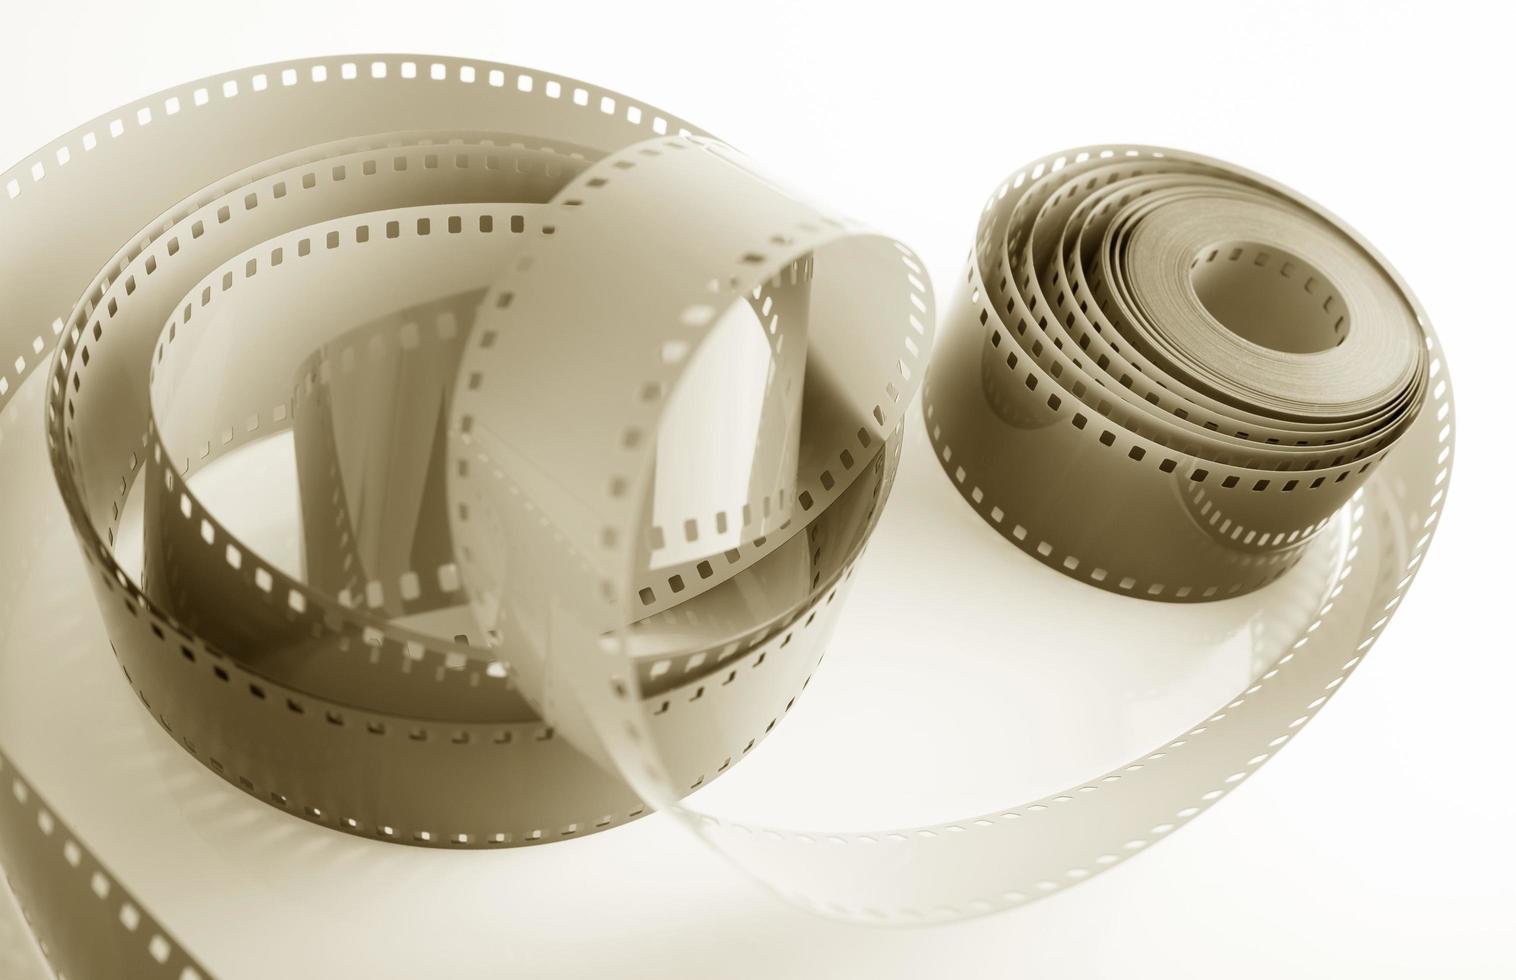 Old Film Reel Stock Photos, Images and Backgrounds for Free Download